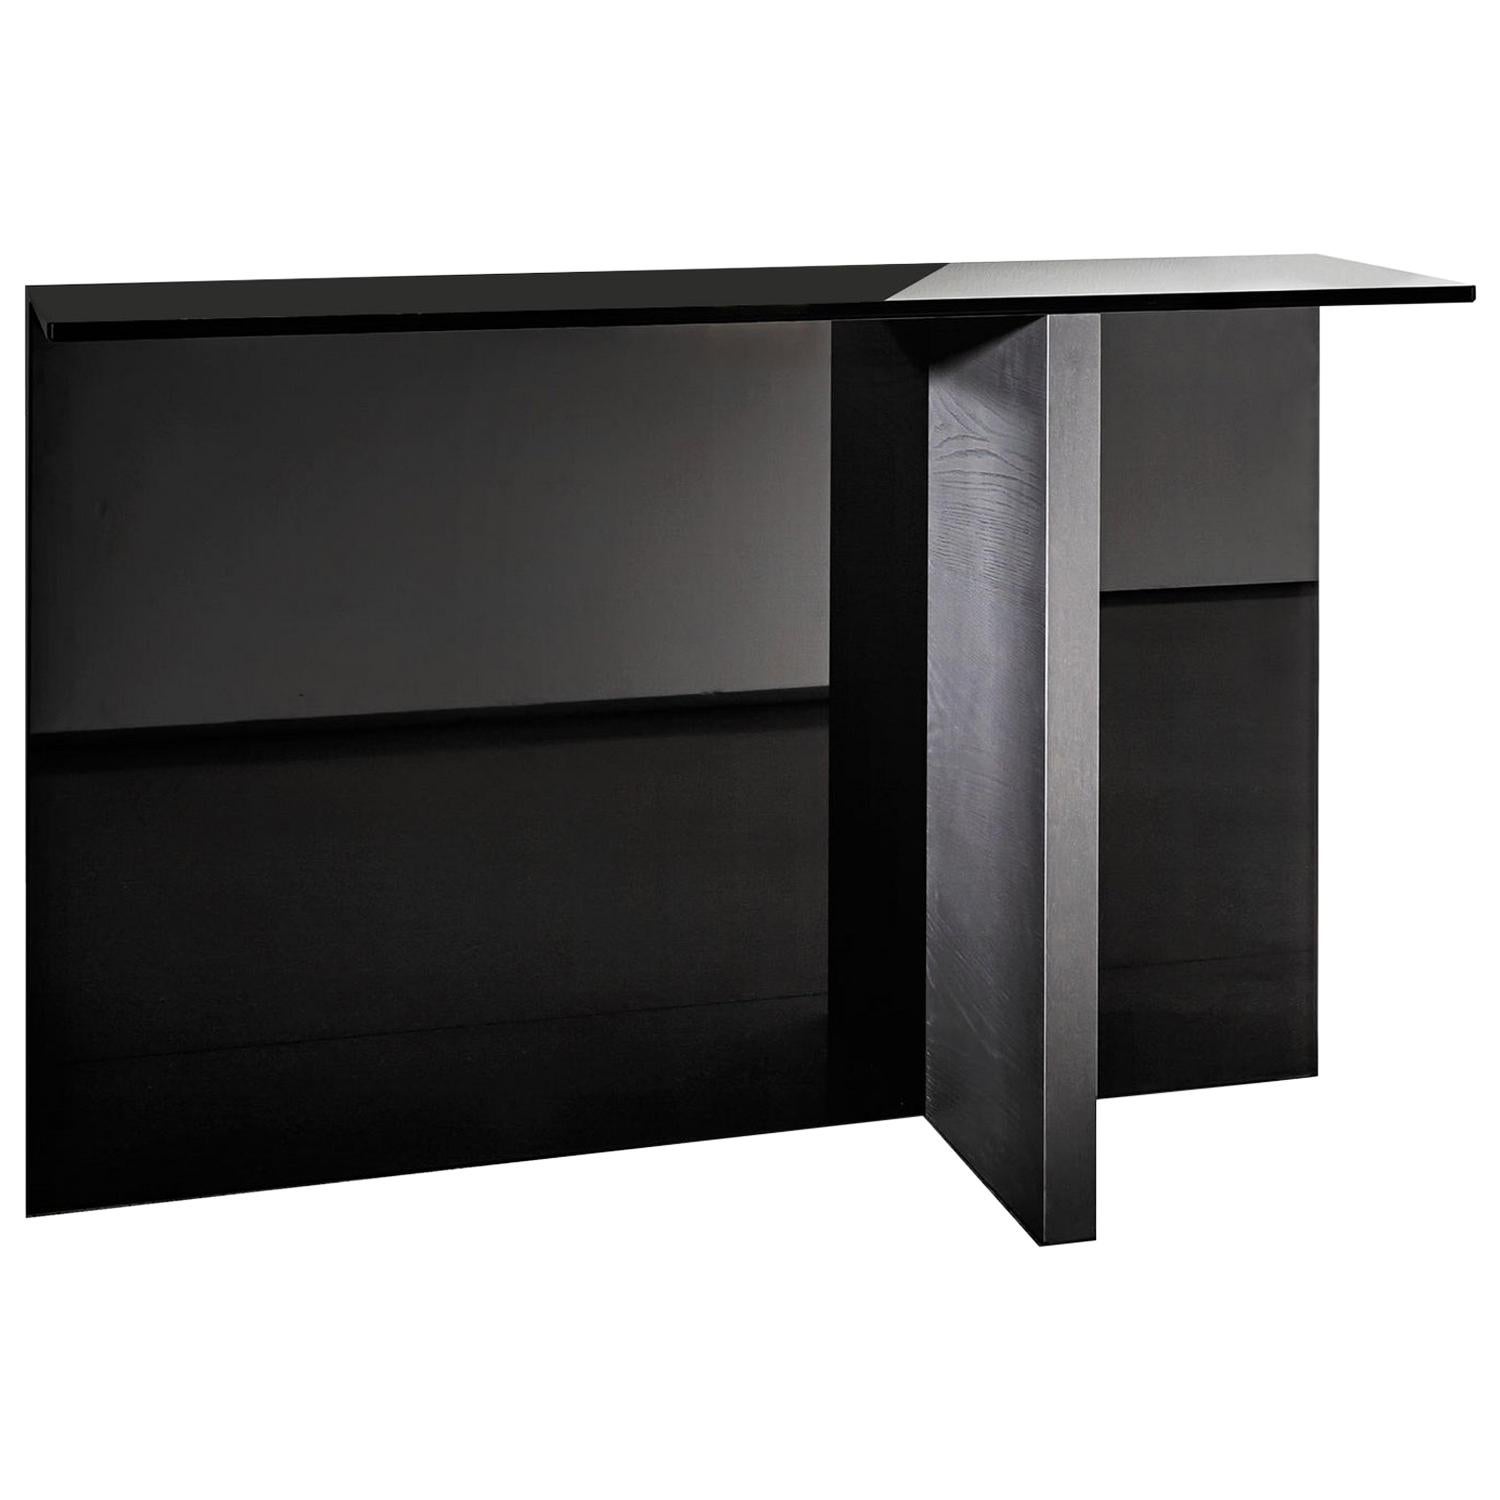 Black Regolo Glass Console, Designed by Lievore Altherr Molina, Made in Italy